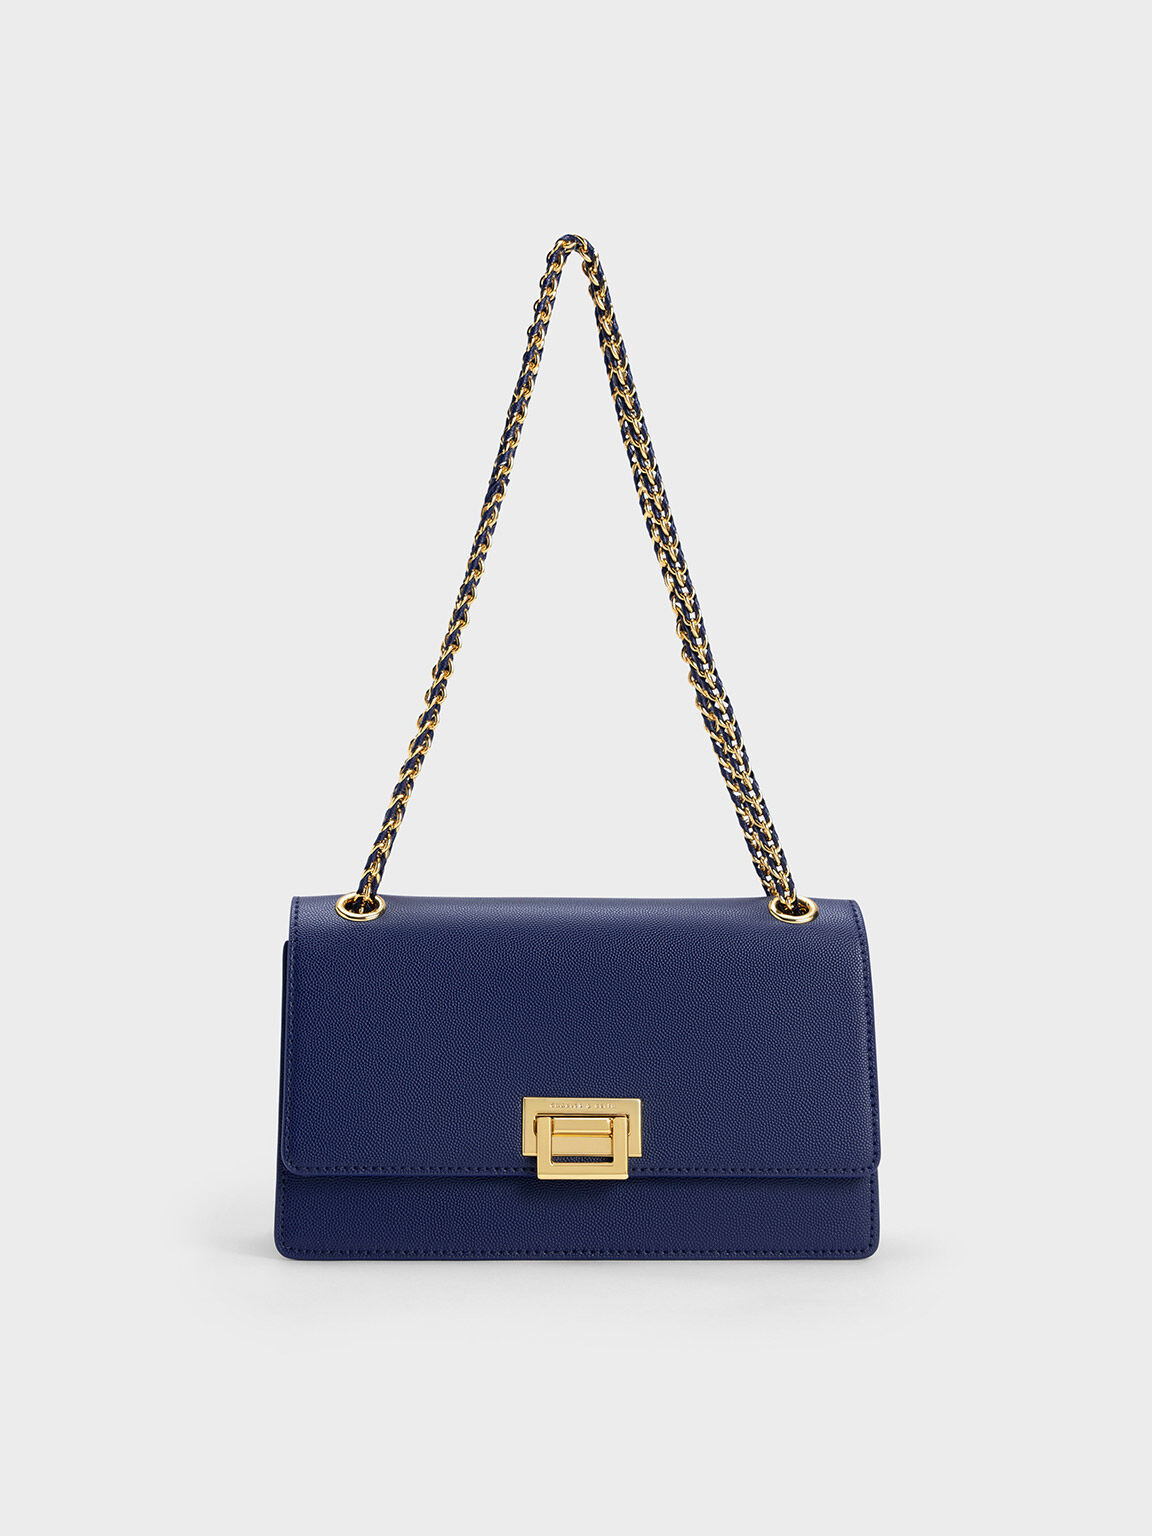 Women's Laptop Bags & Tech Accessories | Shop Online | CHARLES & KEITH US